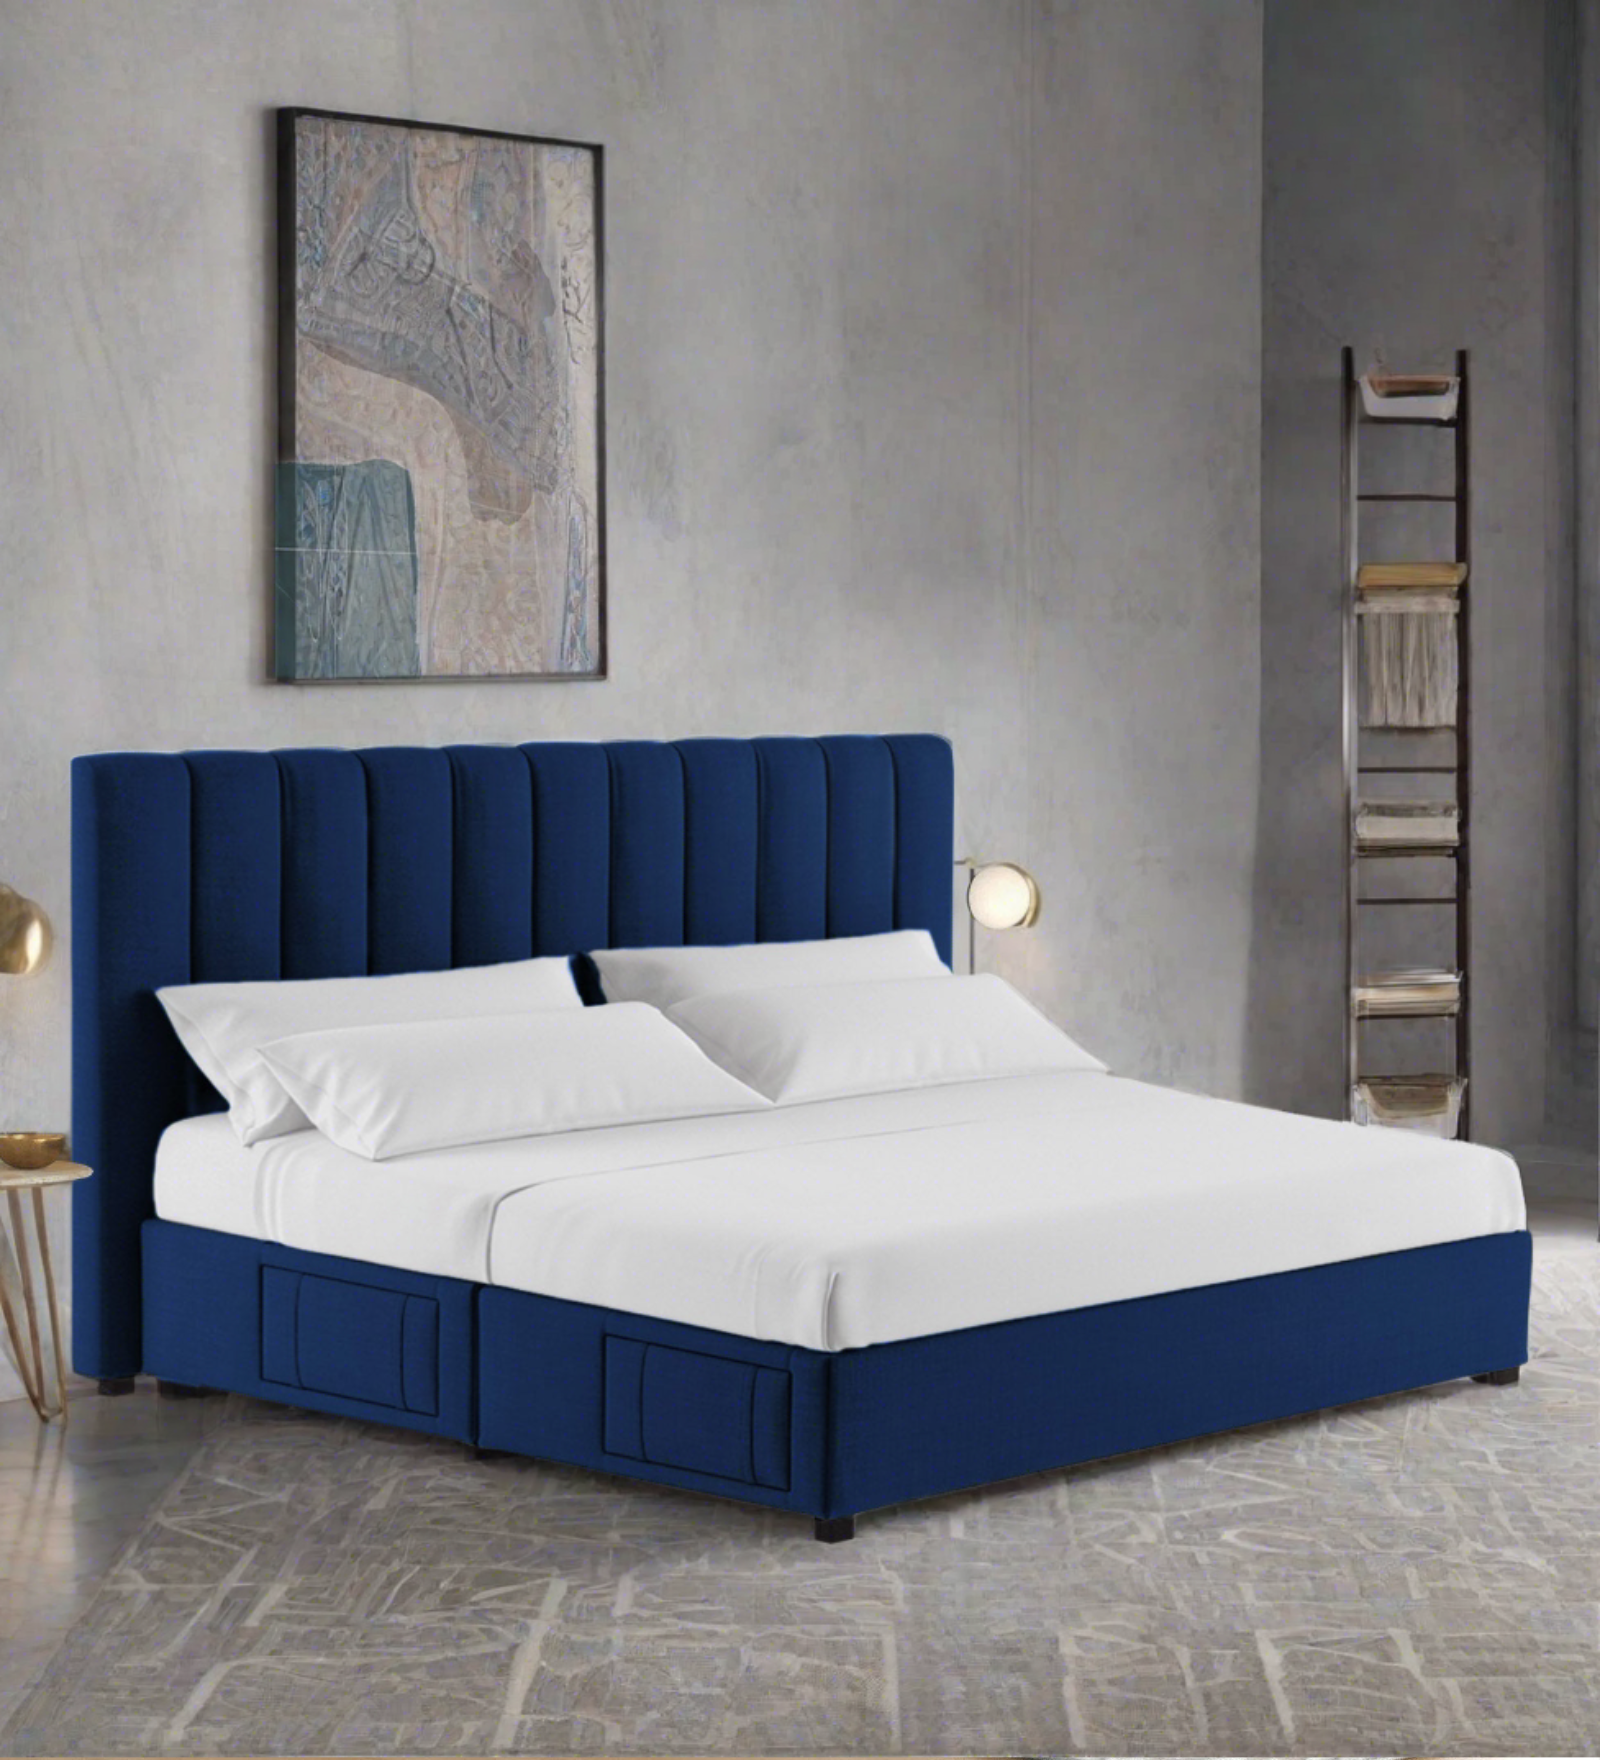 Nivi Fabric King Size Bed In Royal Blue Colour With Drawer Storage